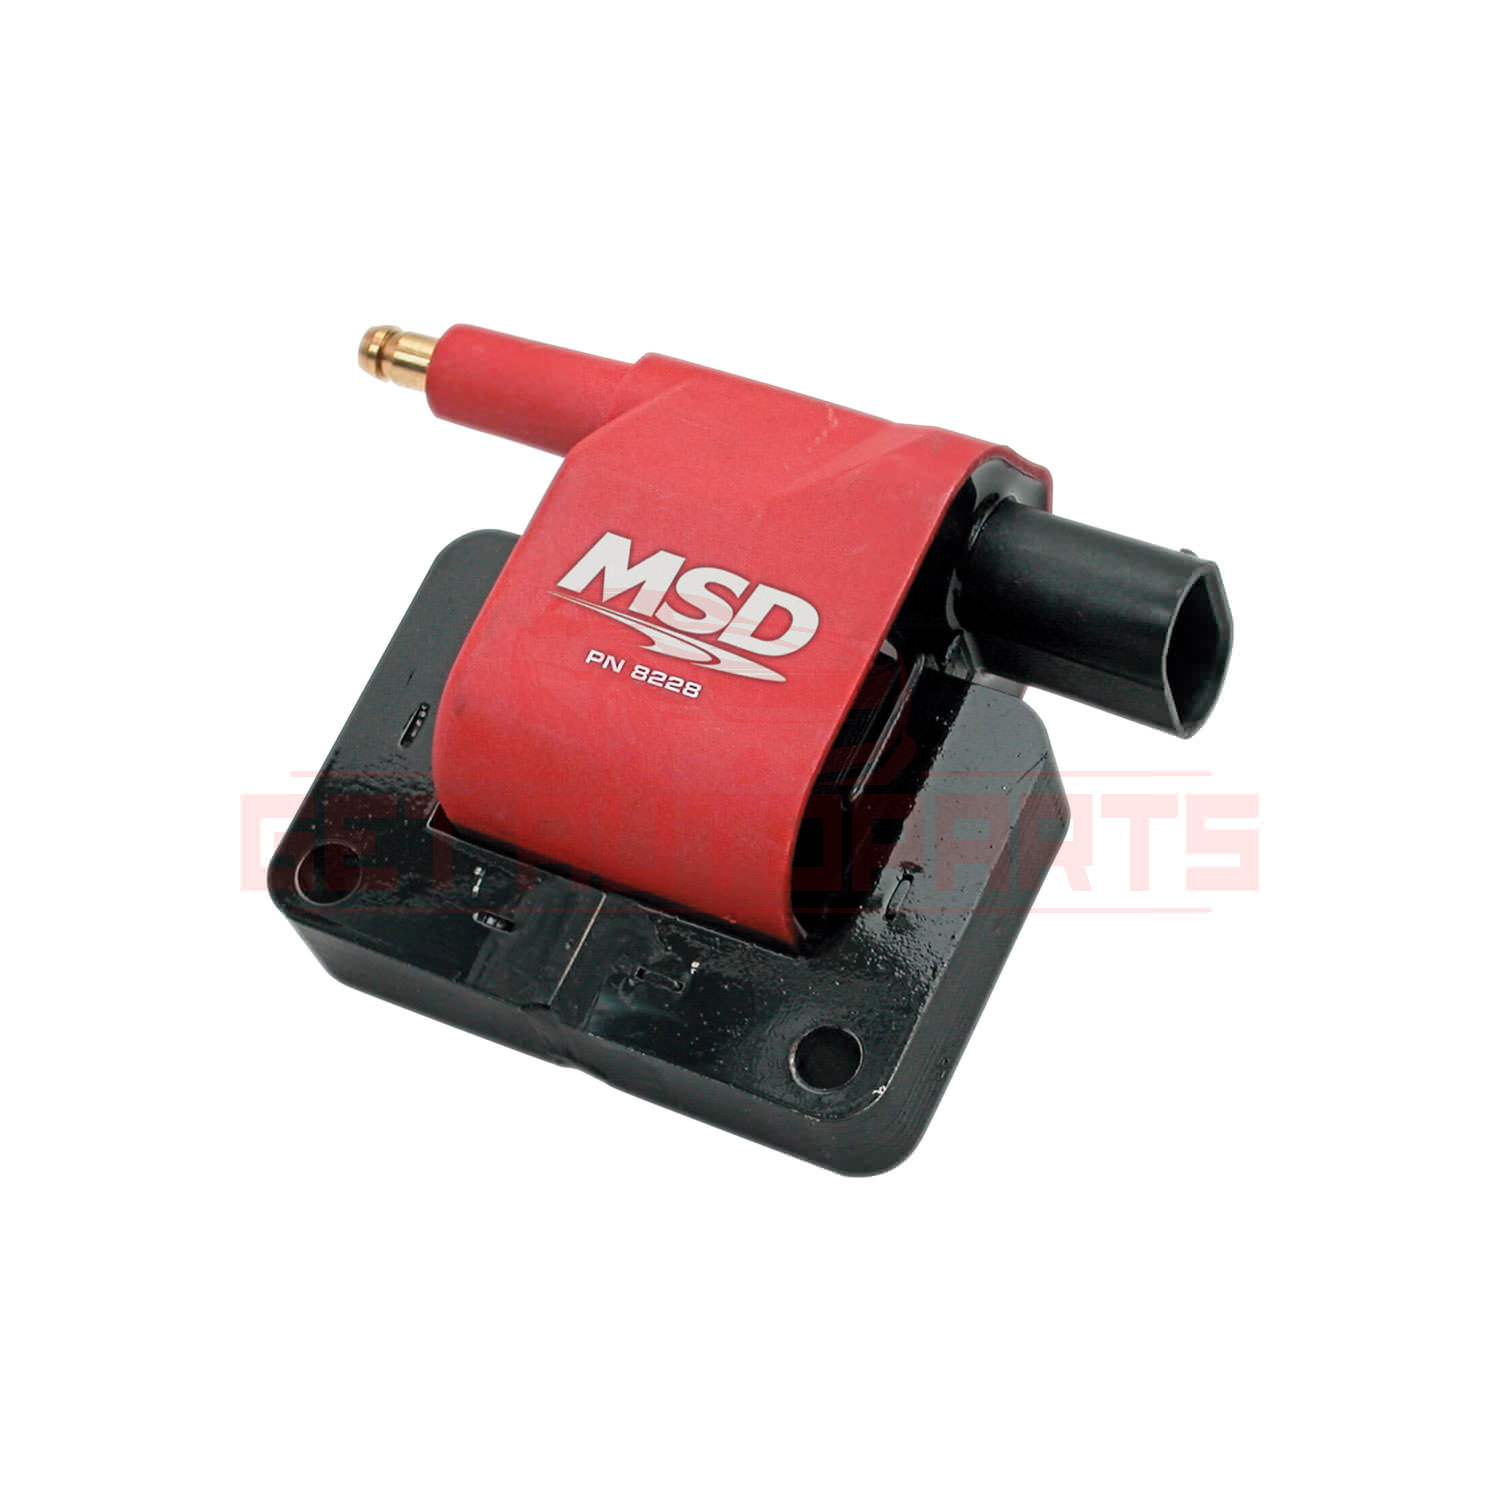 MSD Ignition Coil for Jeep Cherokee 1992-1998